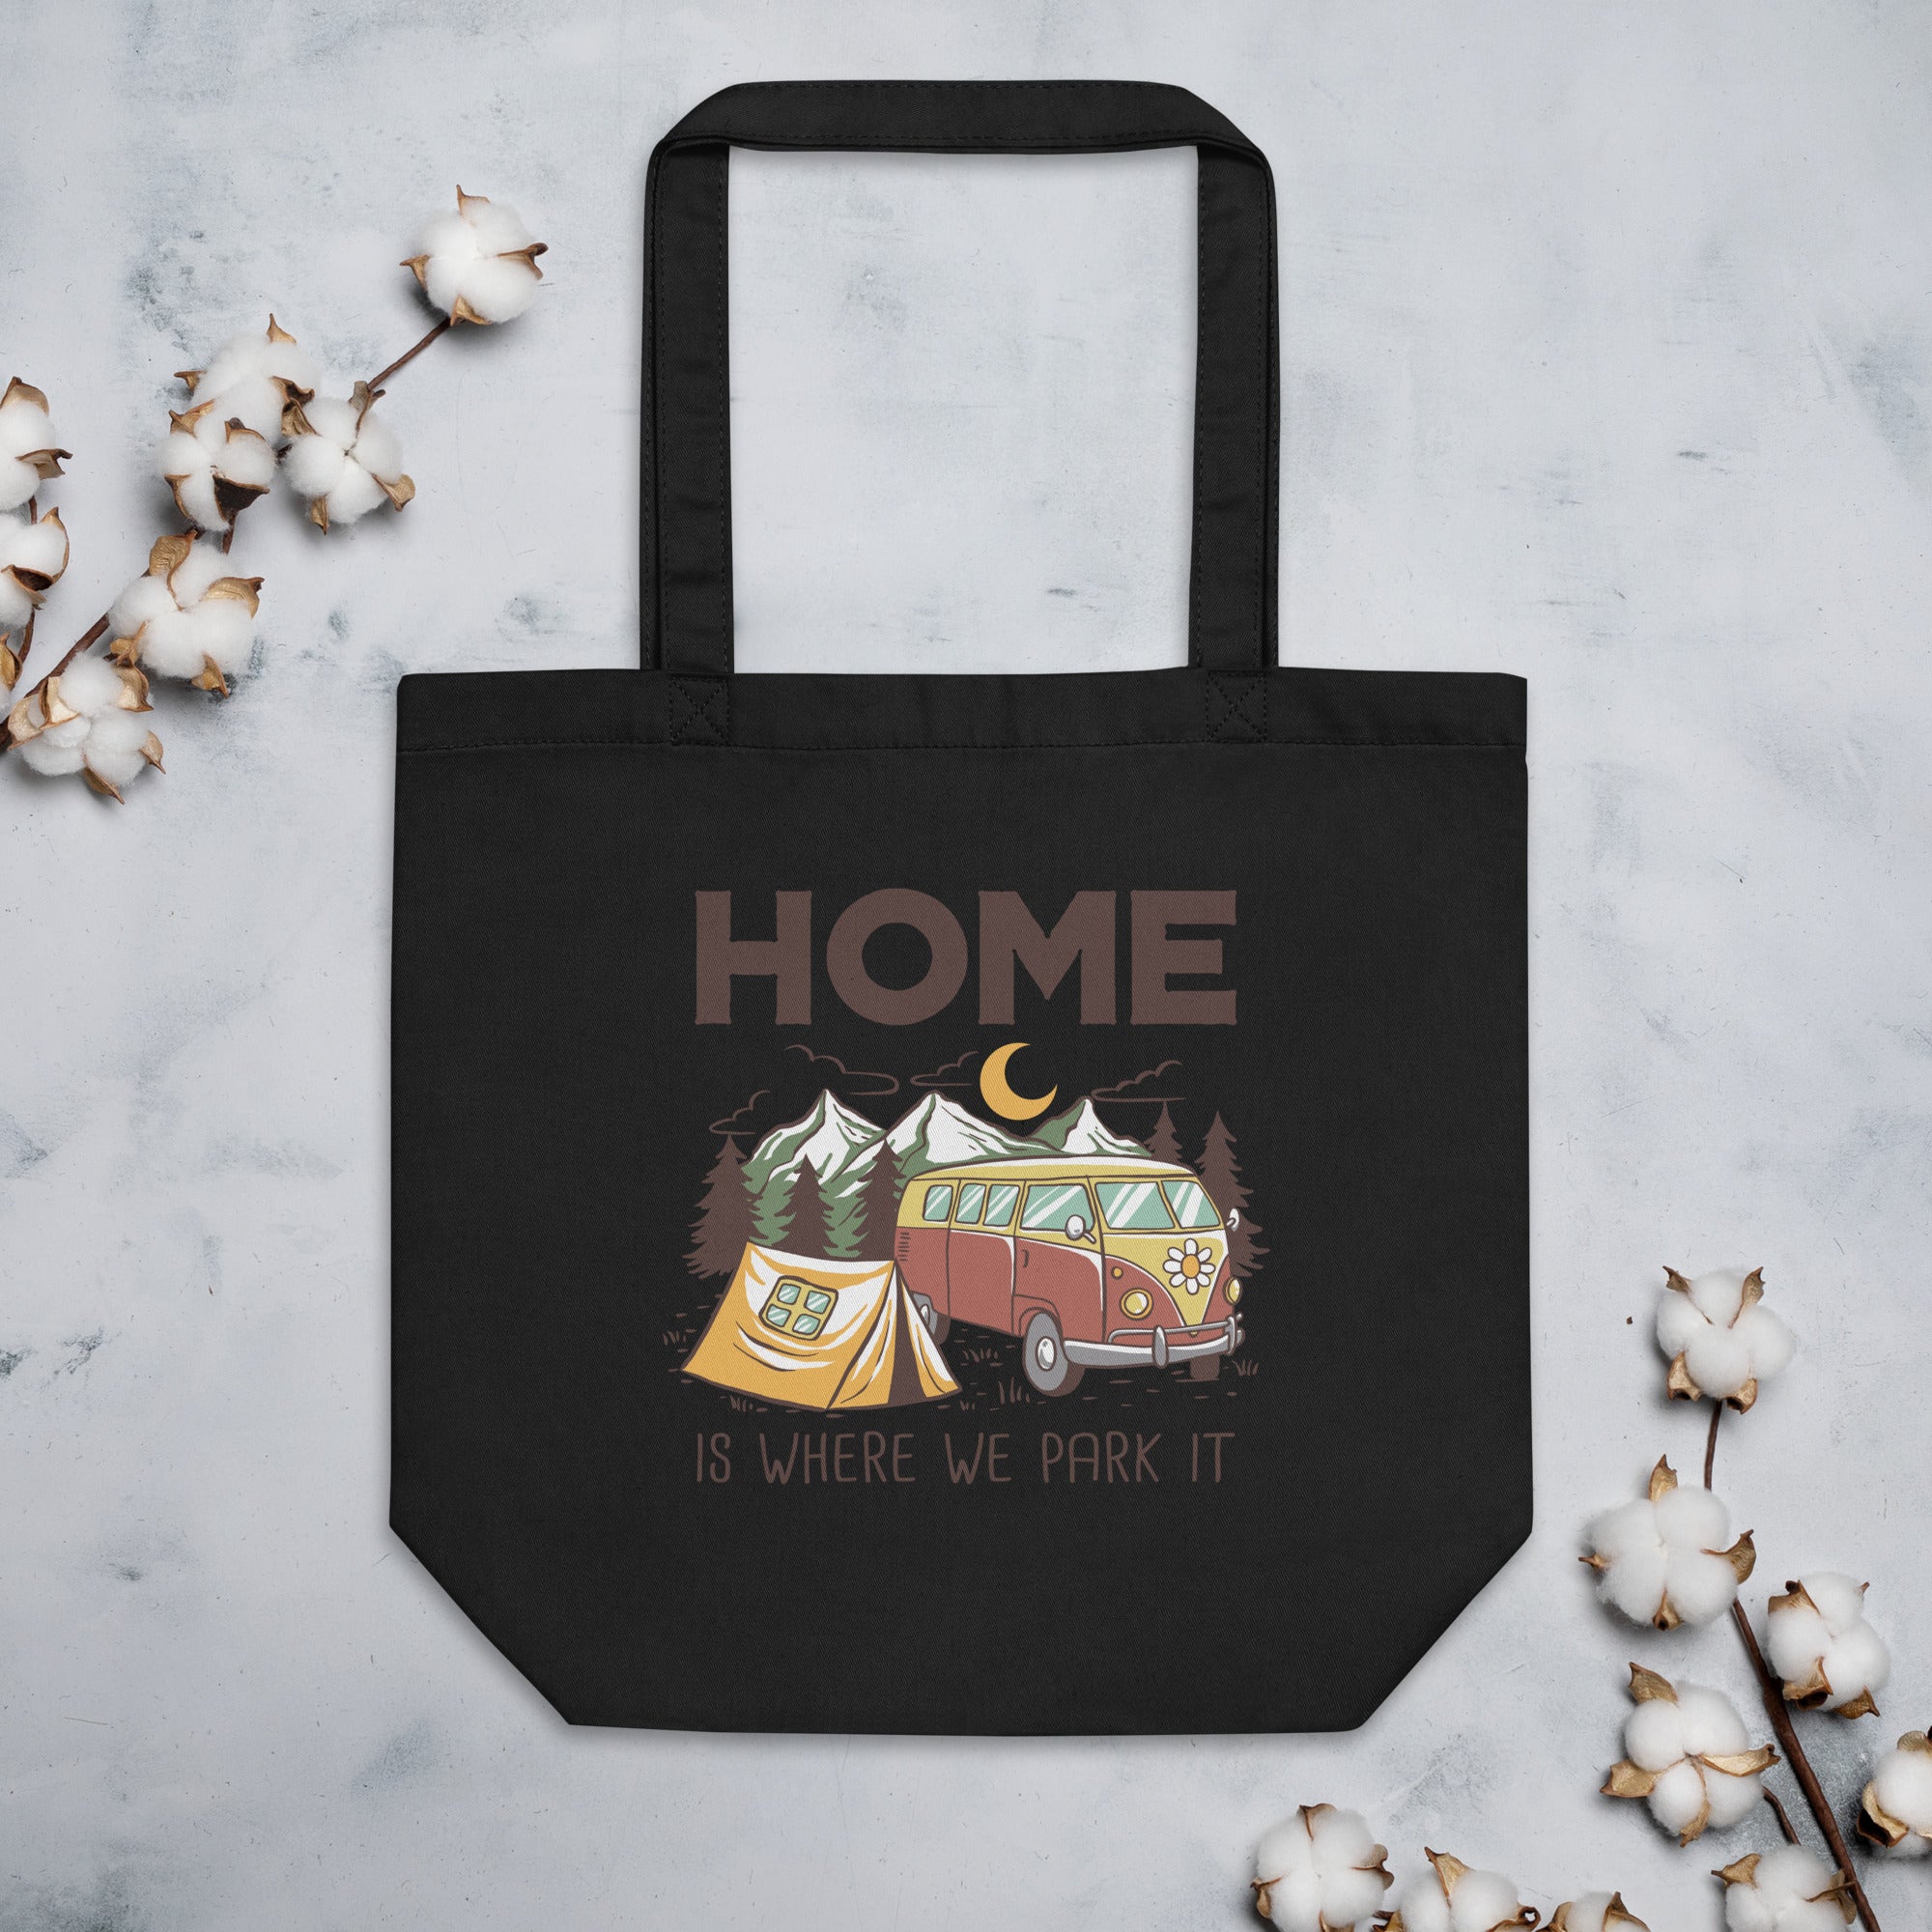 Home is Where We Park It - Tote Bag